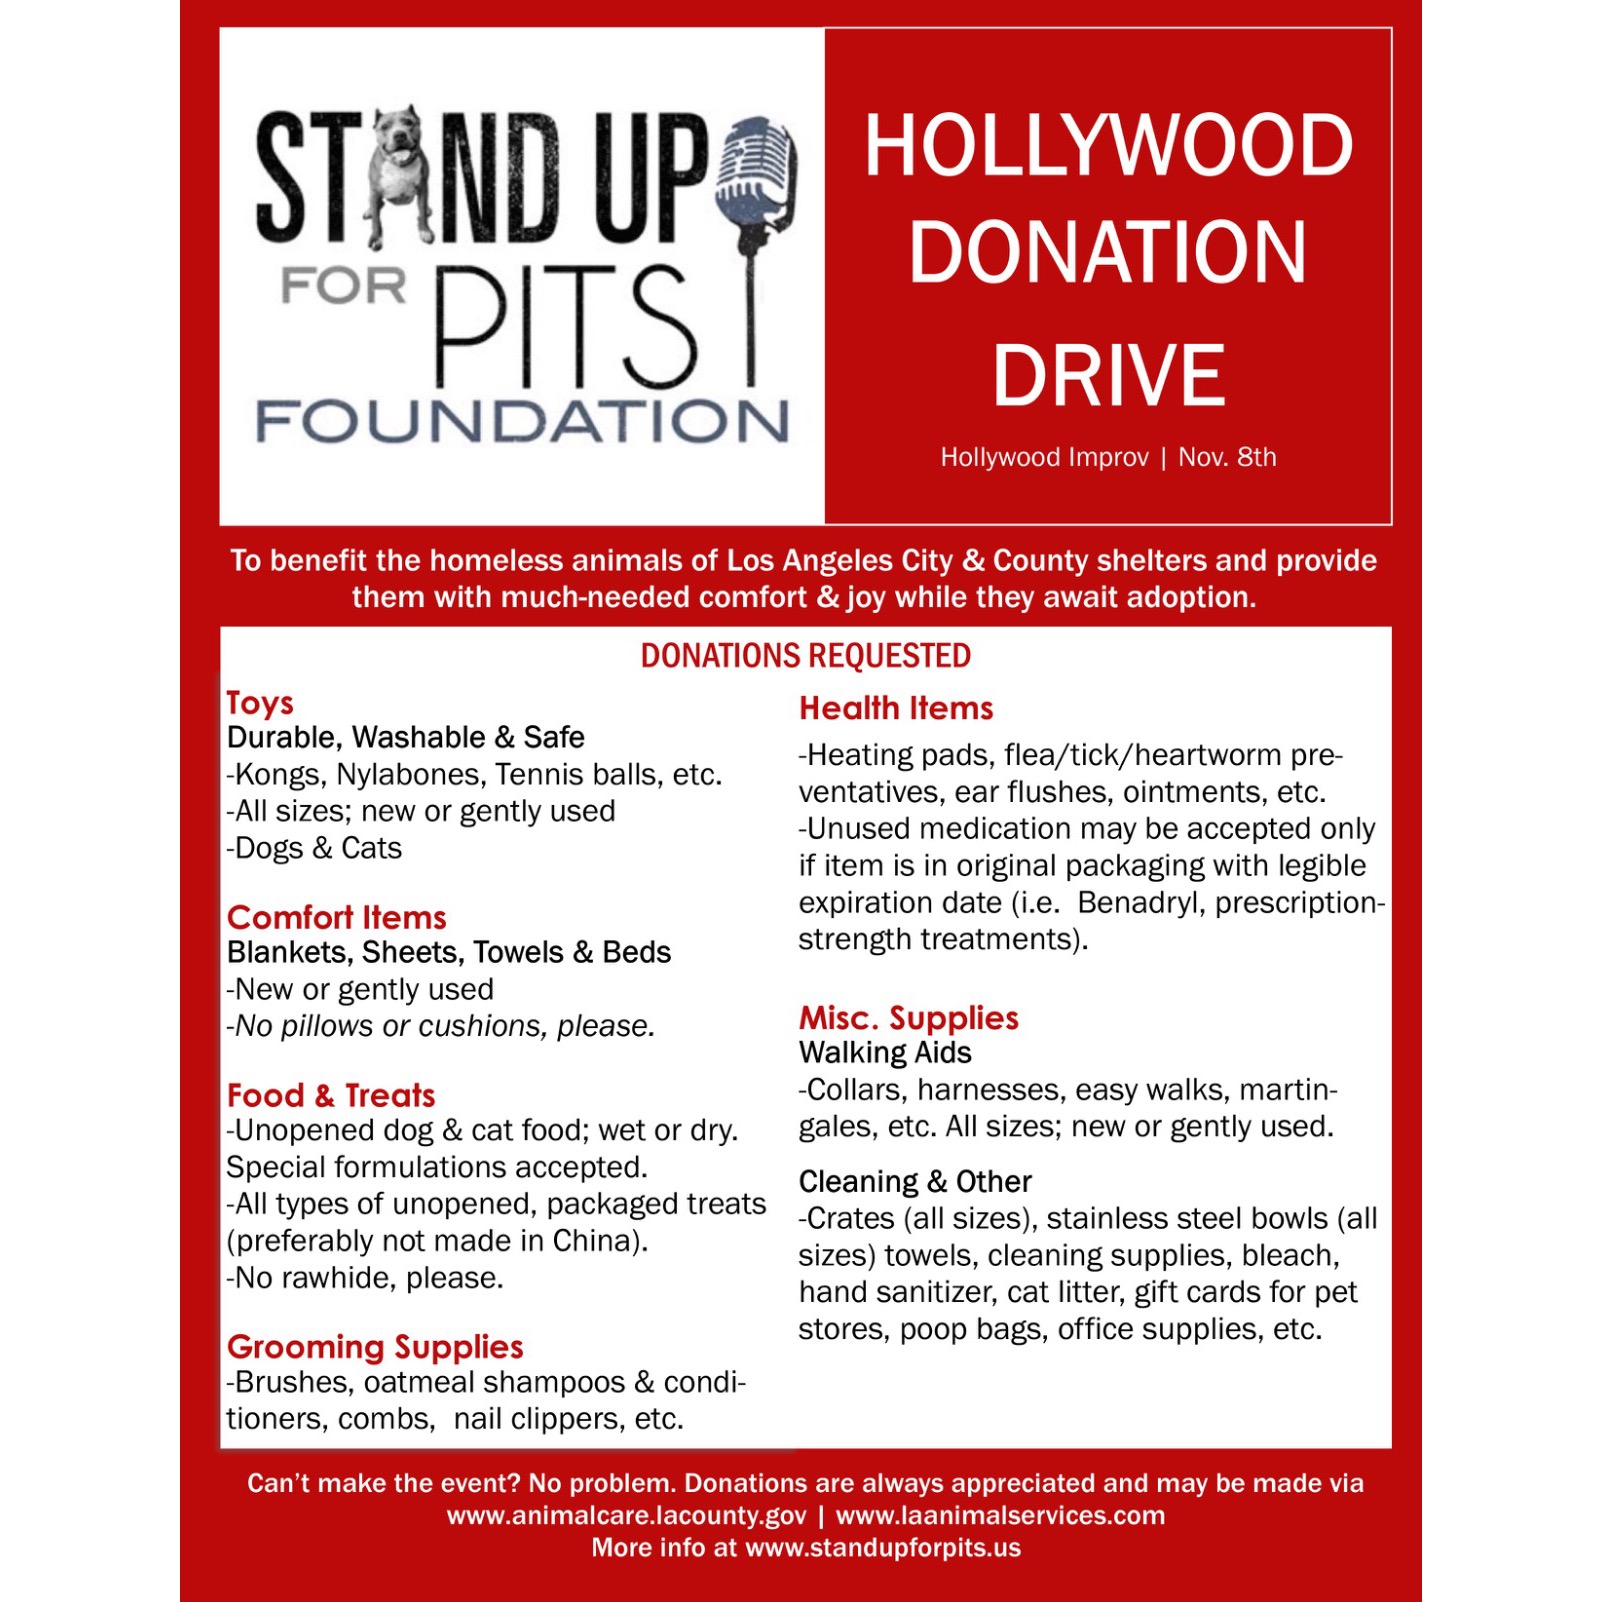 SUFP HOLLYWOOD DONATION DRIVE!!